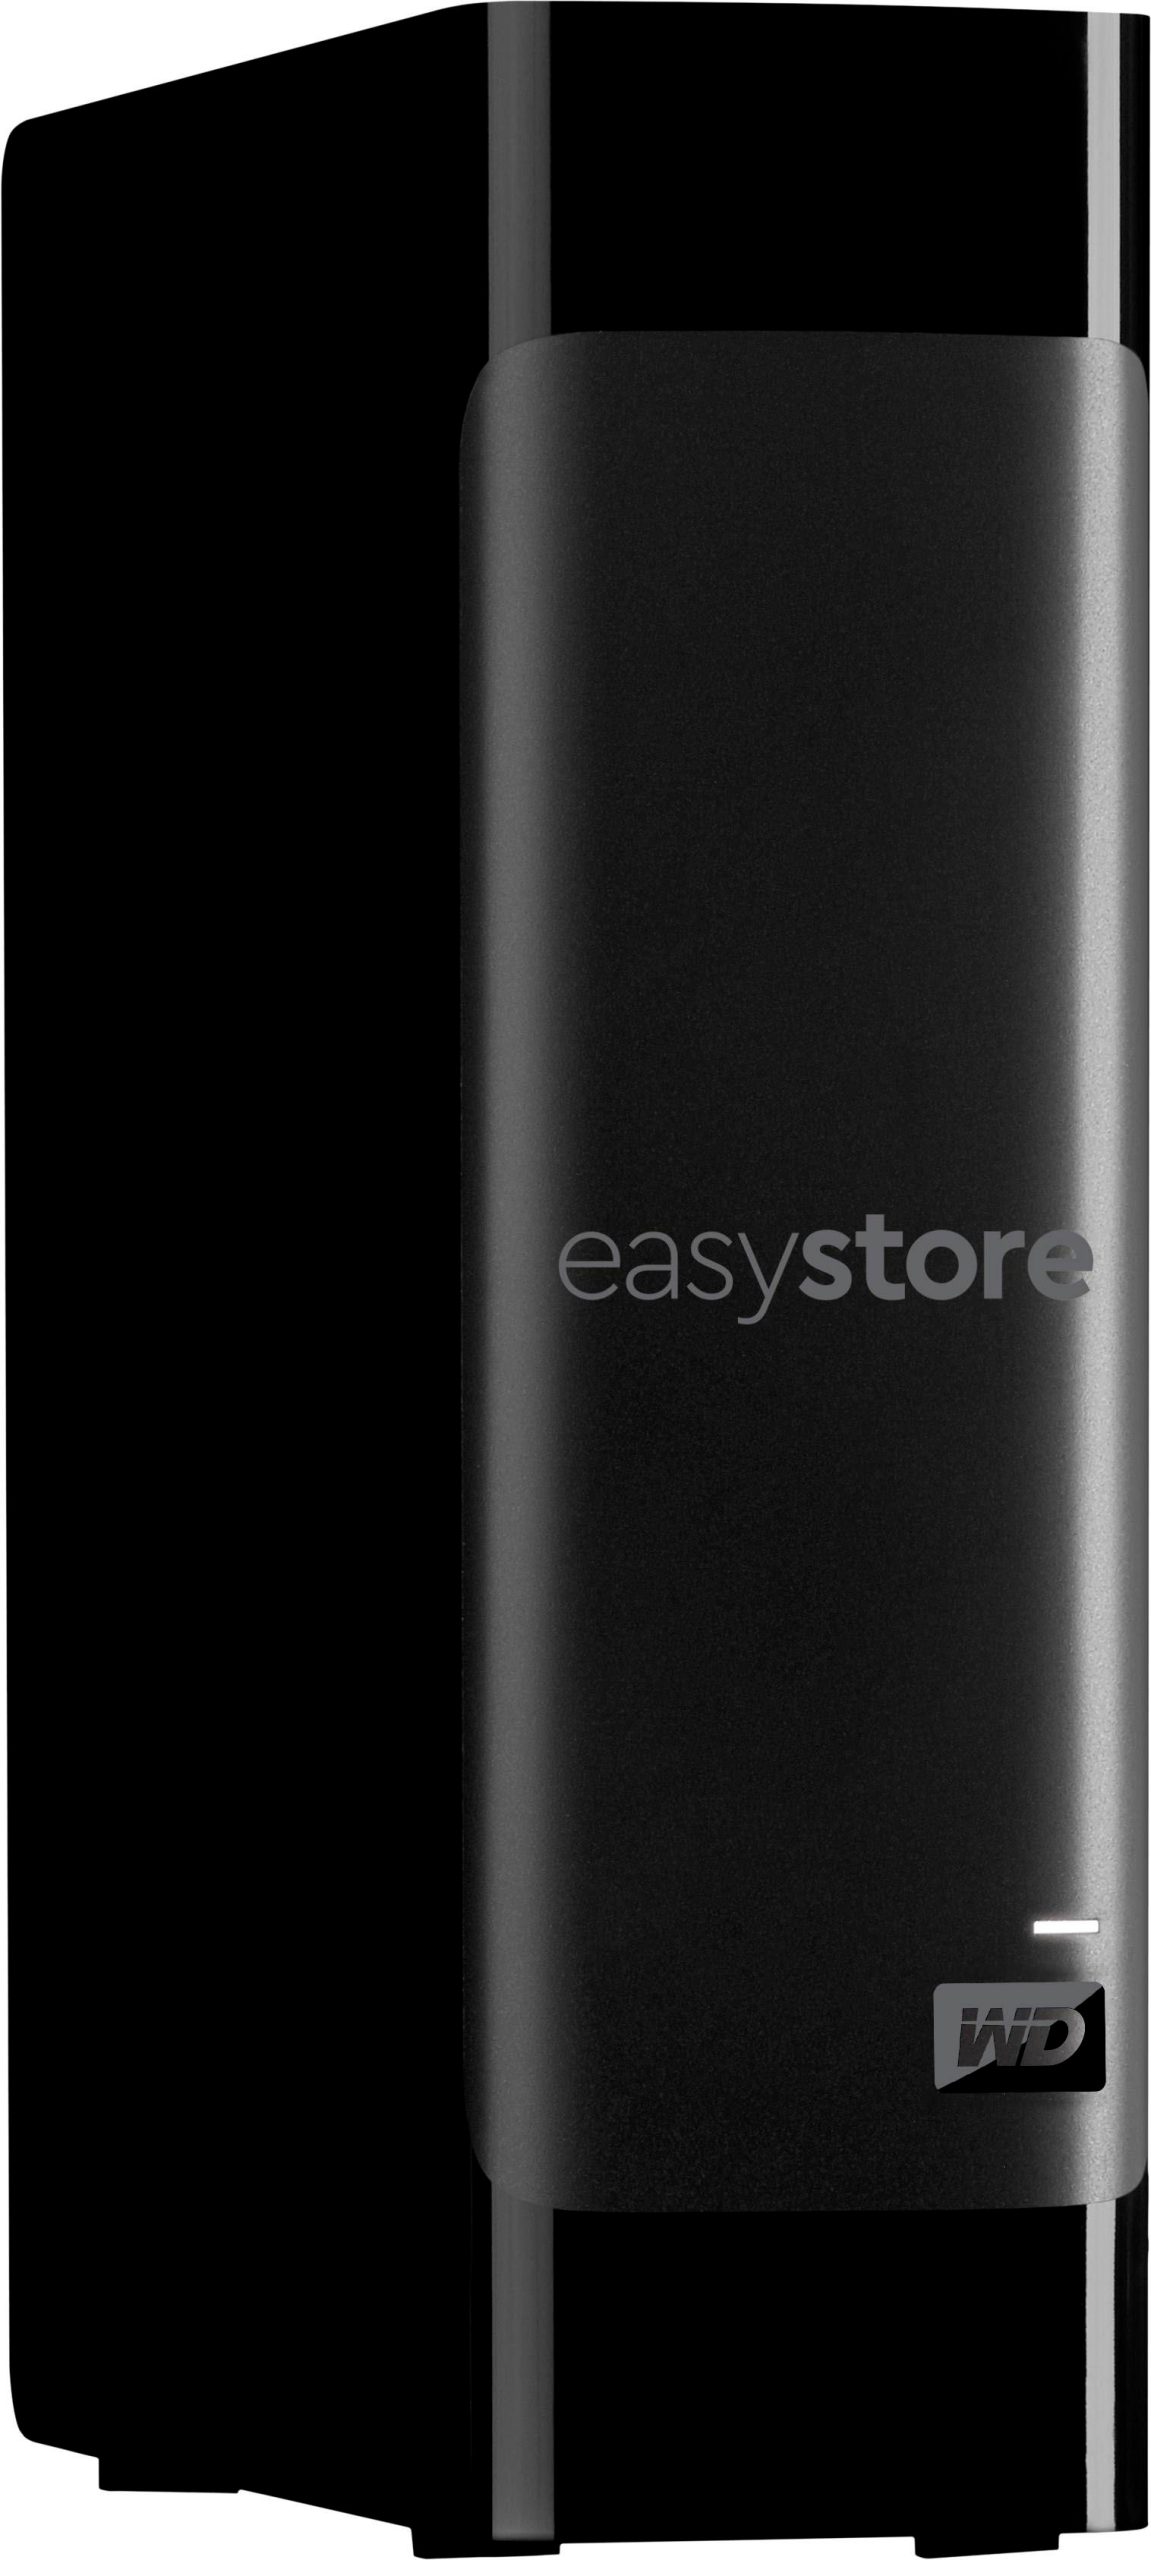 WD – easystore 18TB External USB 3.0 Portable Hard Drive – Black – Just $299.99 at Best Buy